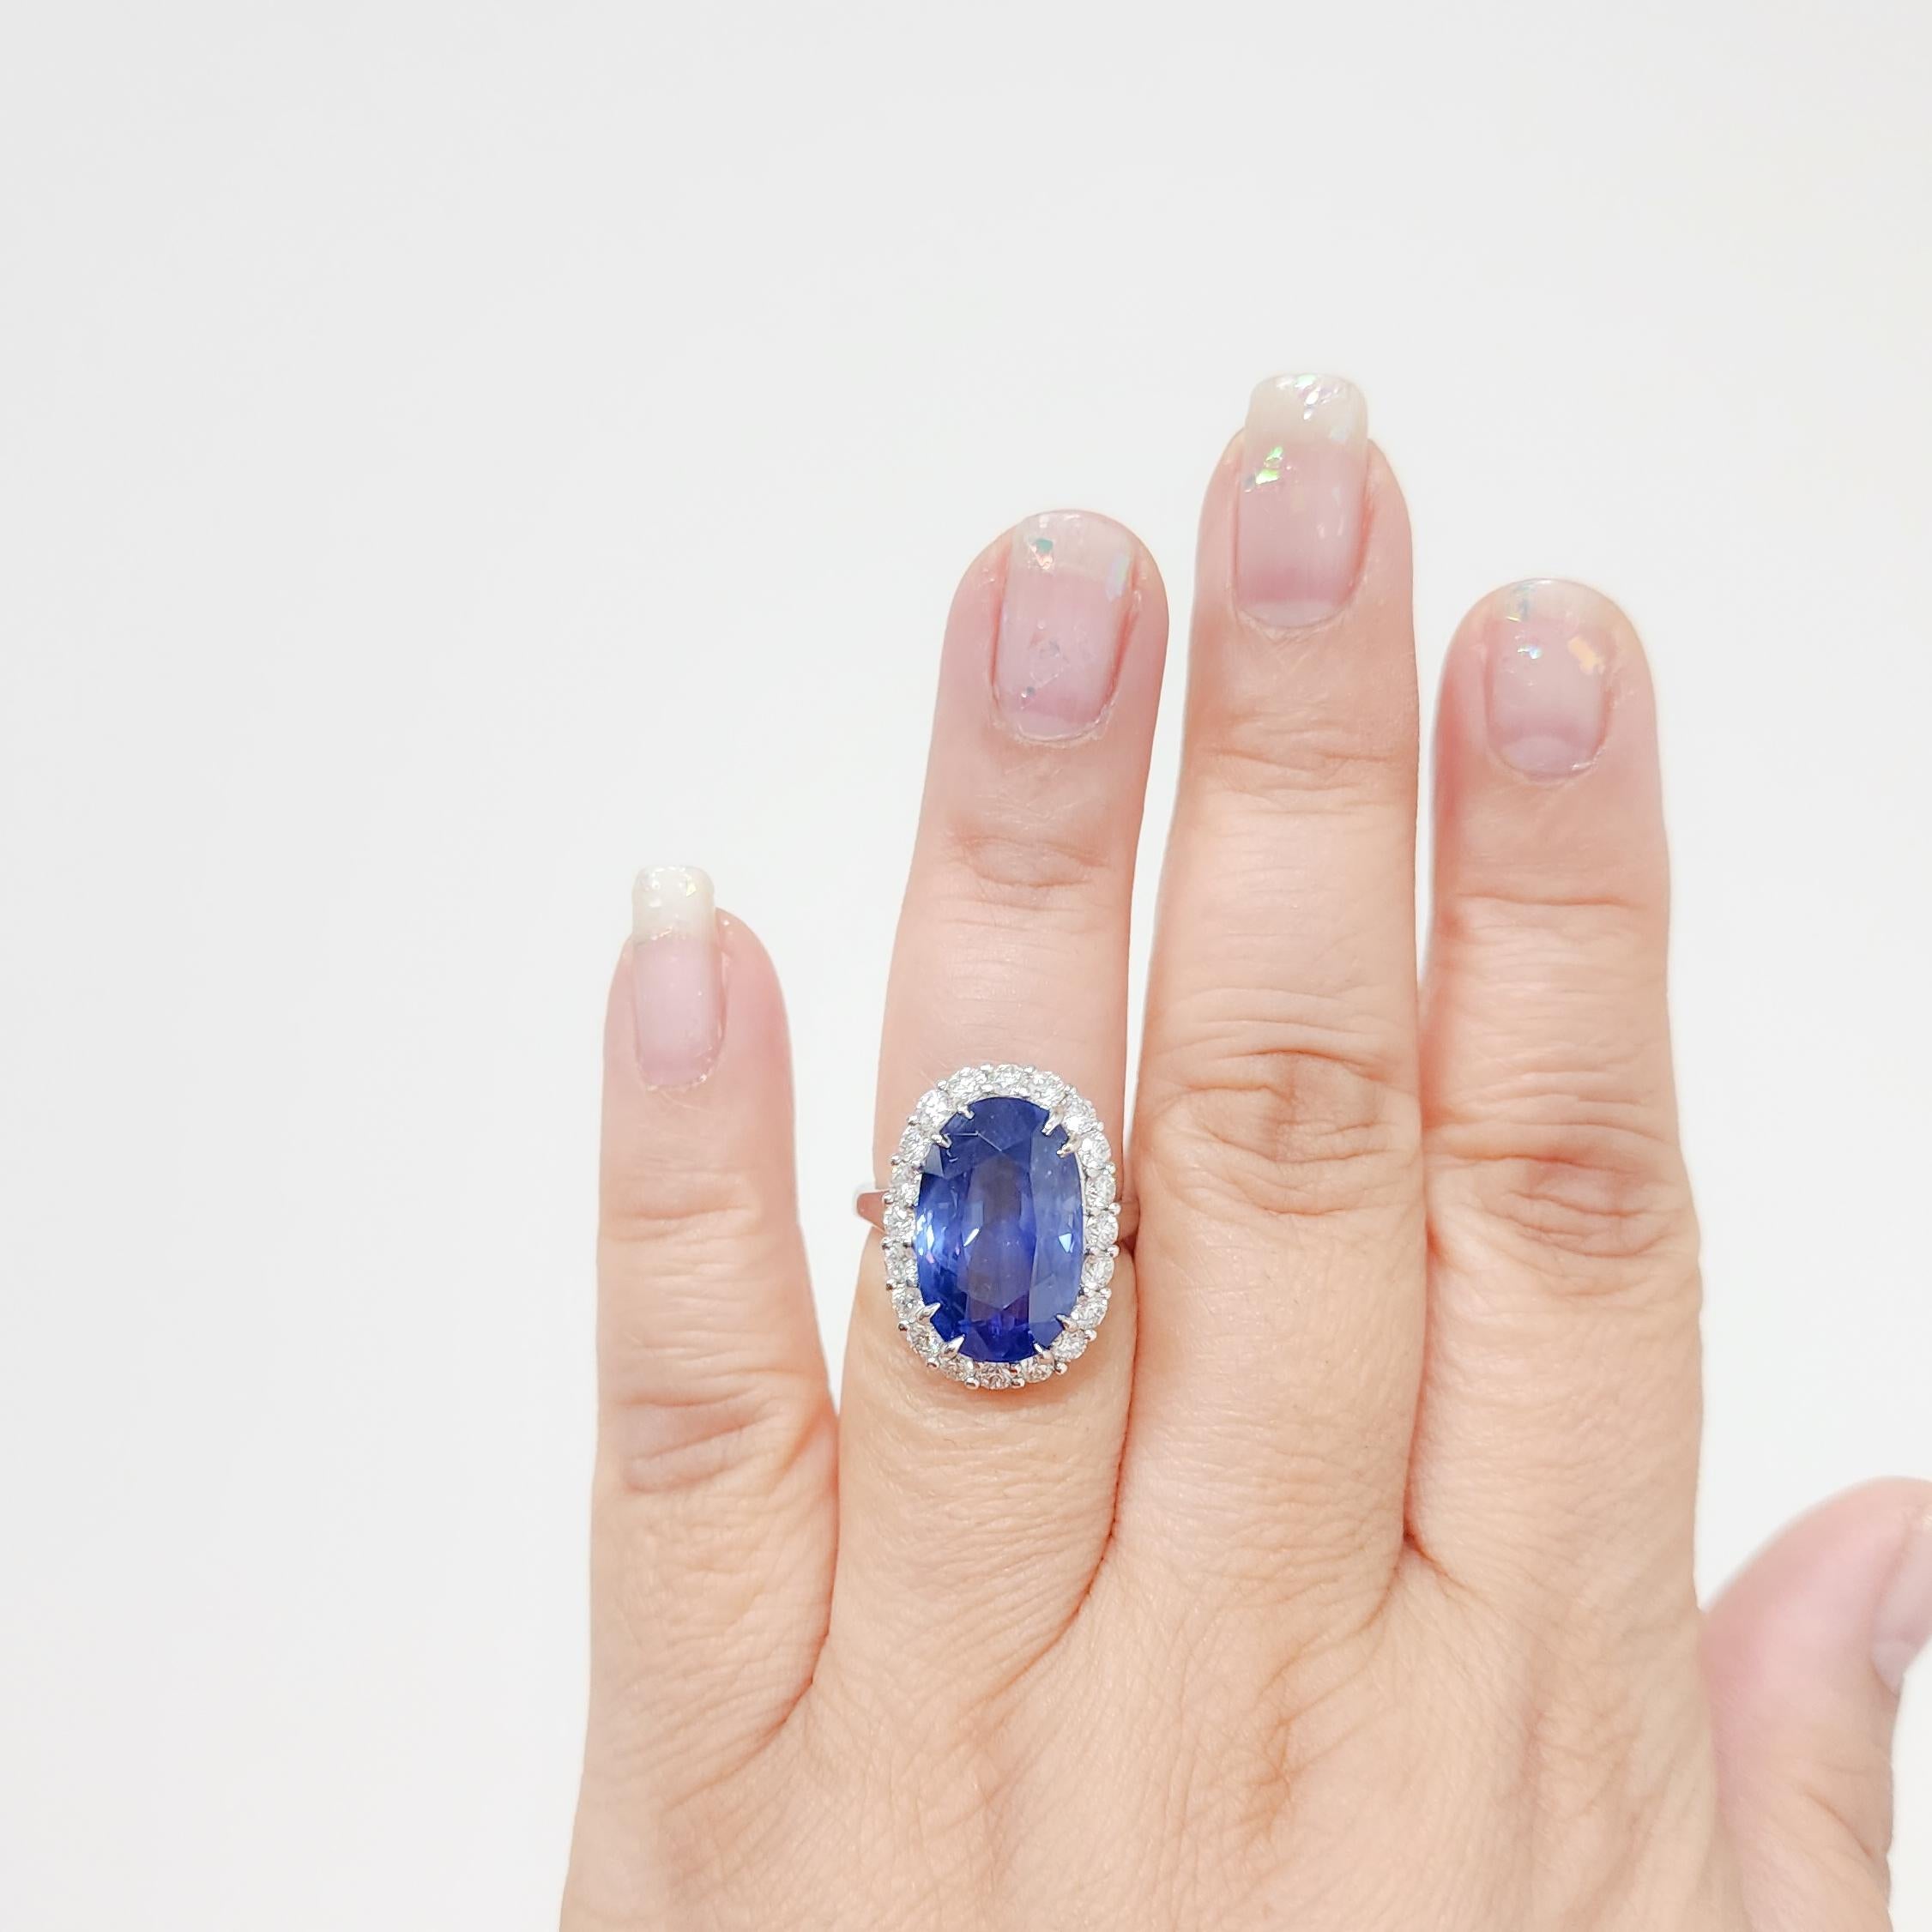 Gorgeous 16.47 ct. good quality bright blue sapphire oval from Sri Lanka with 1.34 ct. good quality white diamond rounds.  Handmade in platinum.  Ring size 6.5.  GIA certificate included.